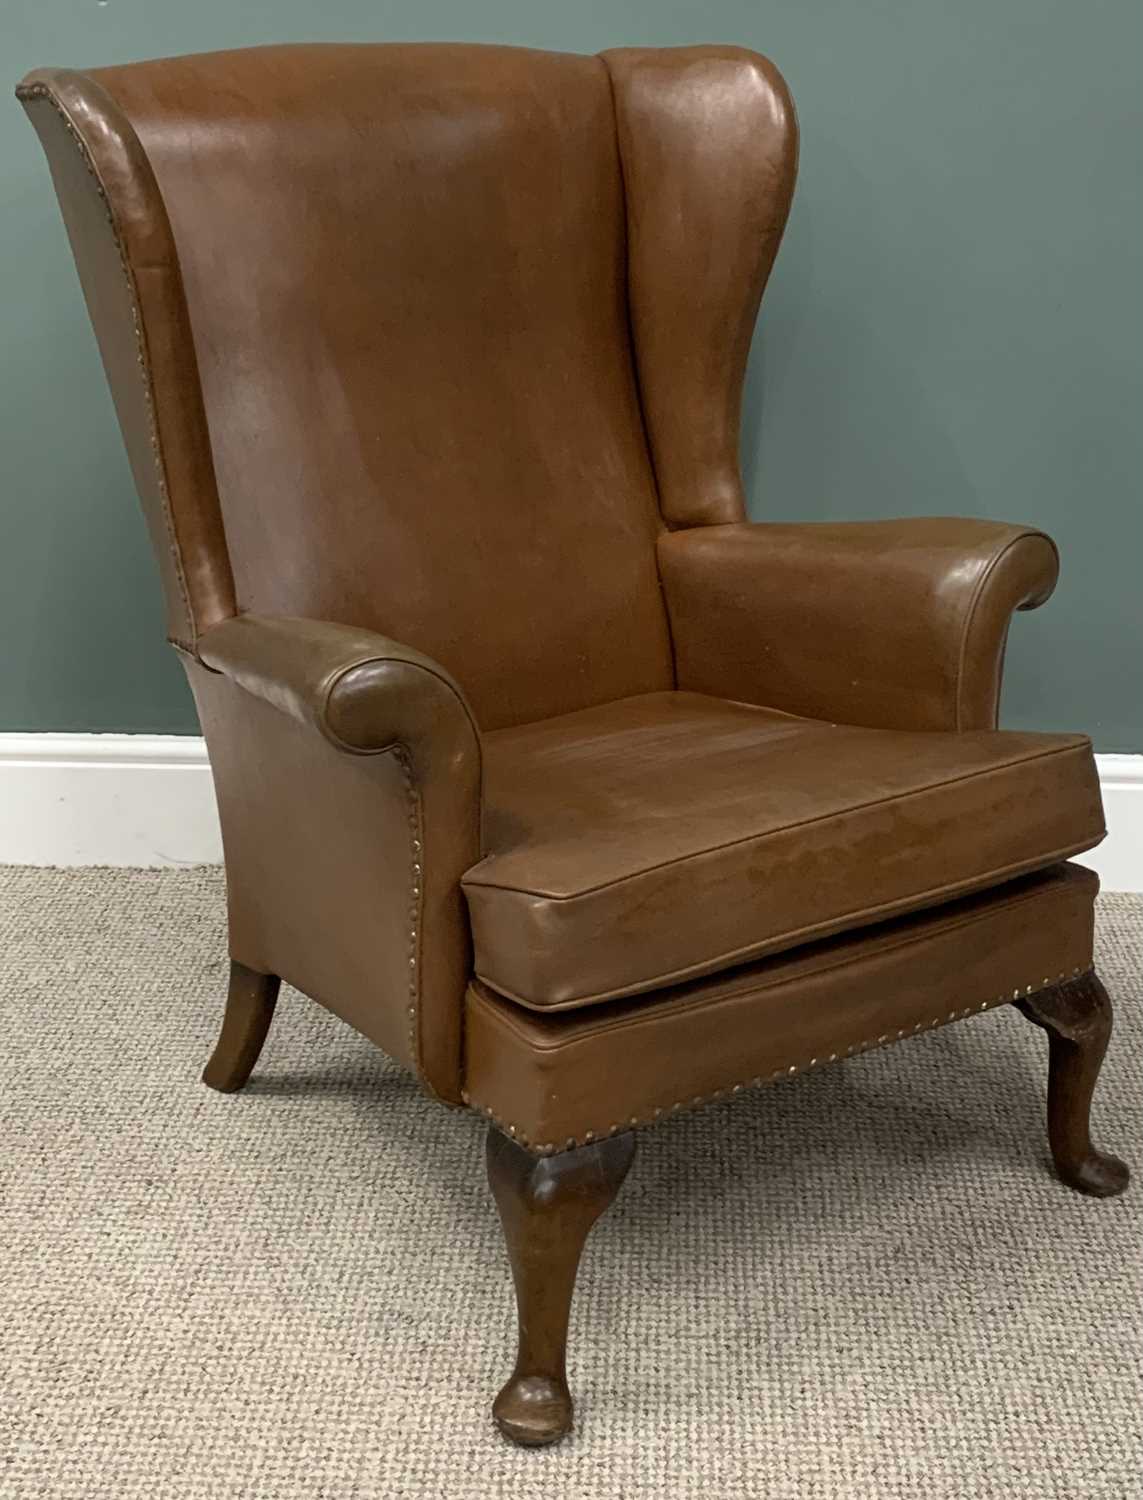 PARKER KNOLL WINGBACK ARMCHAIR in brown leather-effect, curled arm ends, metal button detail, - Image 3 of 5